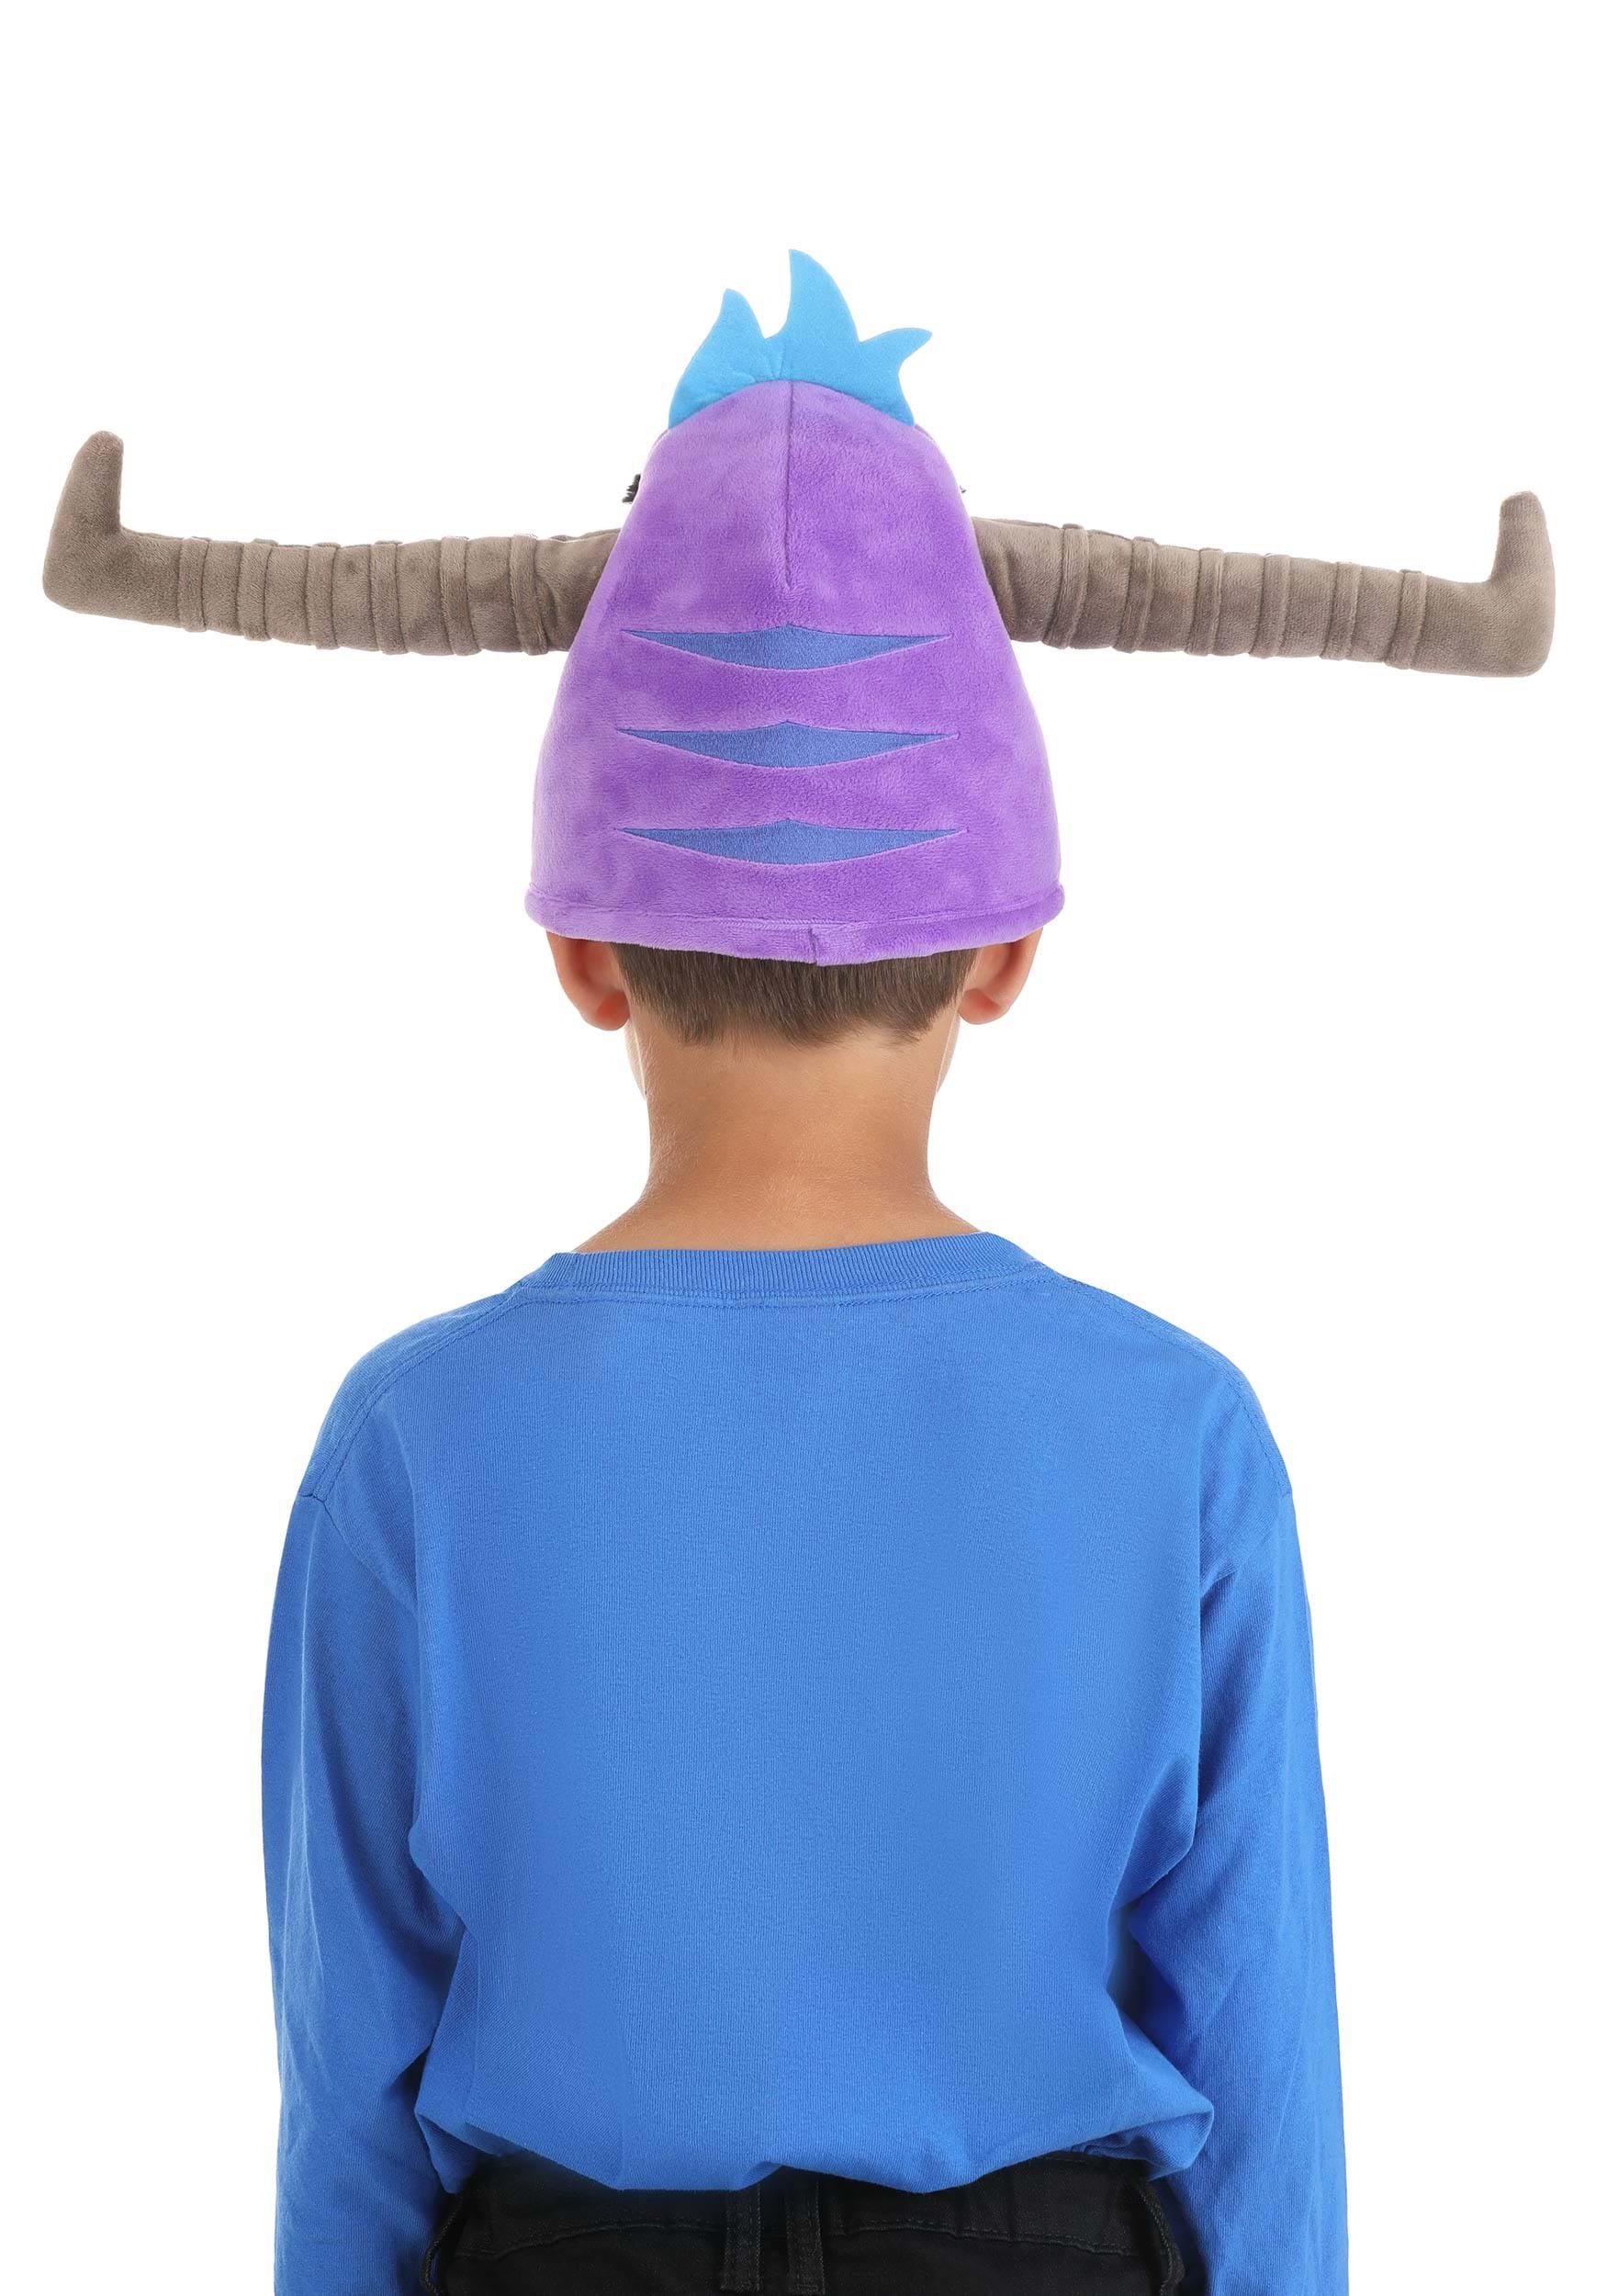 Monsters At Work Tylor Soft Costume Hat